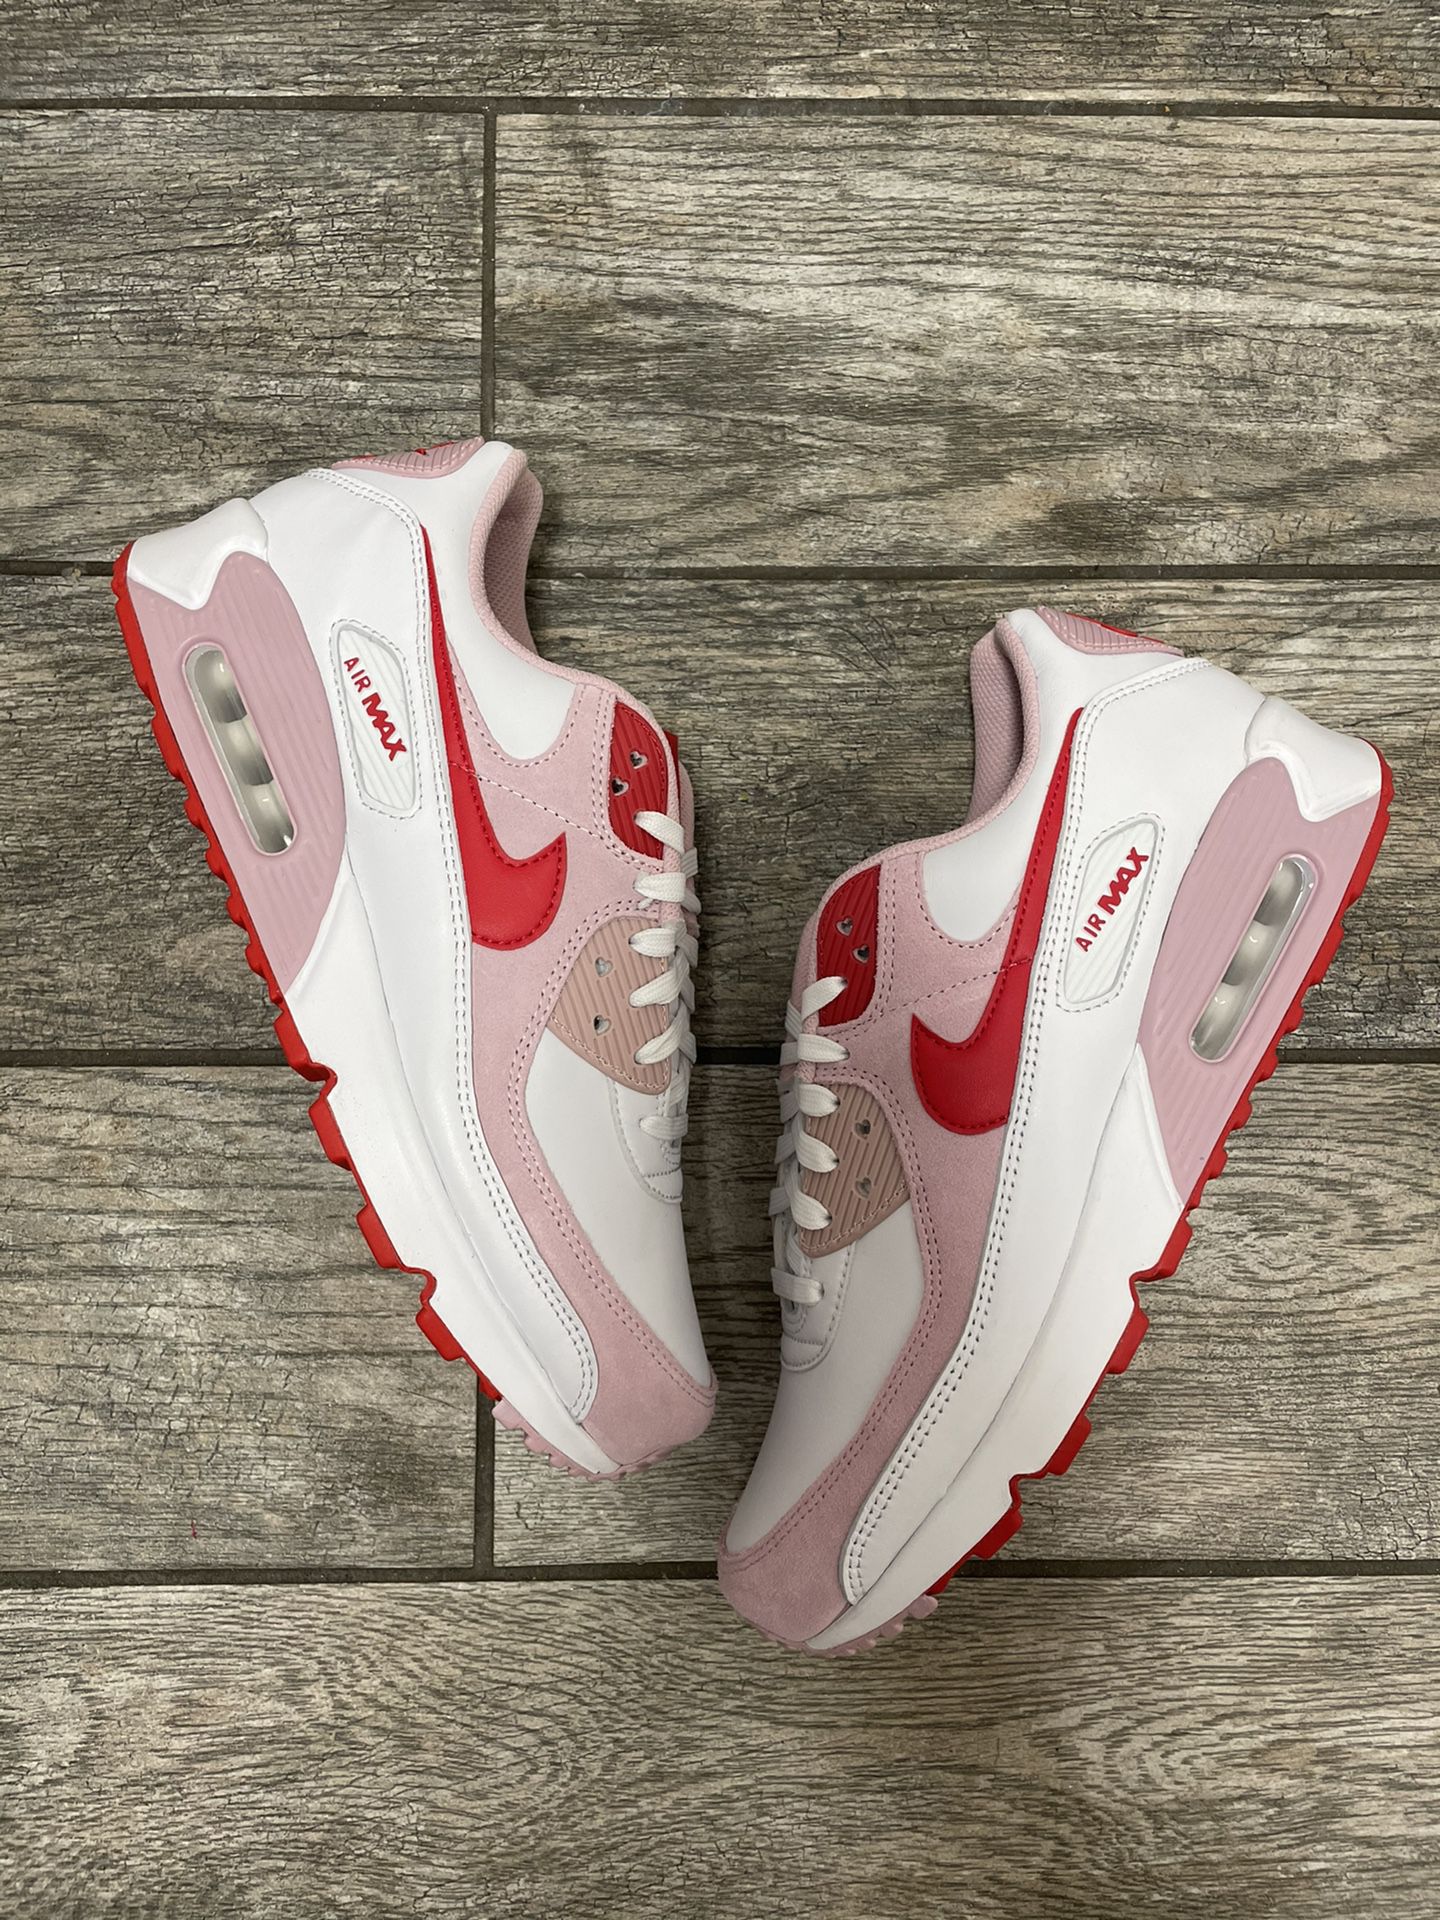 Nike Air Max 90 “Love Letter” for Sale in Long Beach, CA - OfferUp